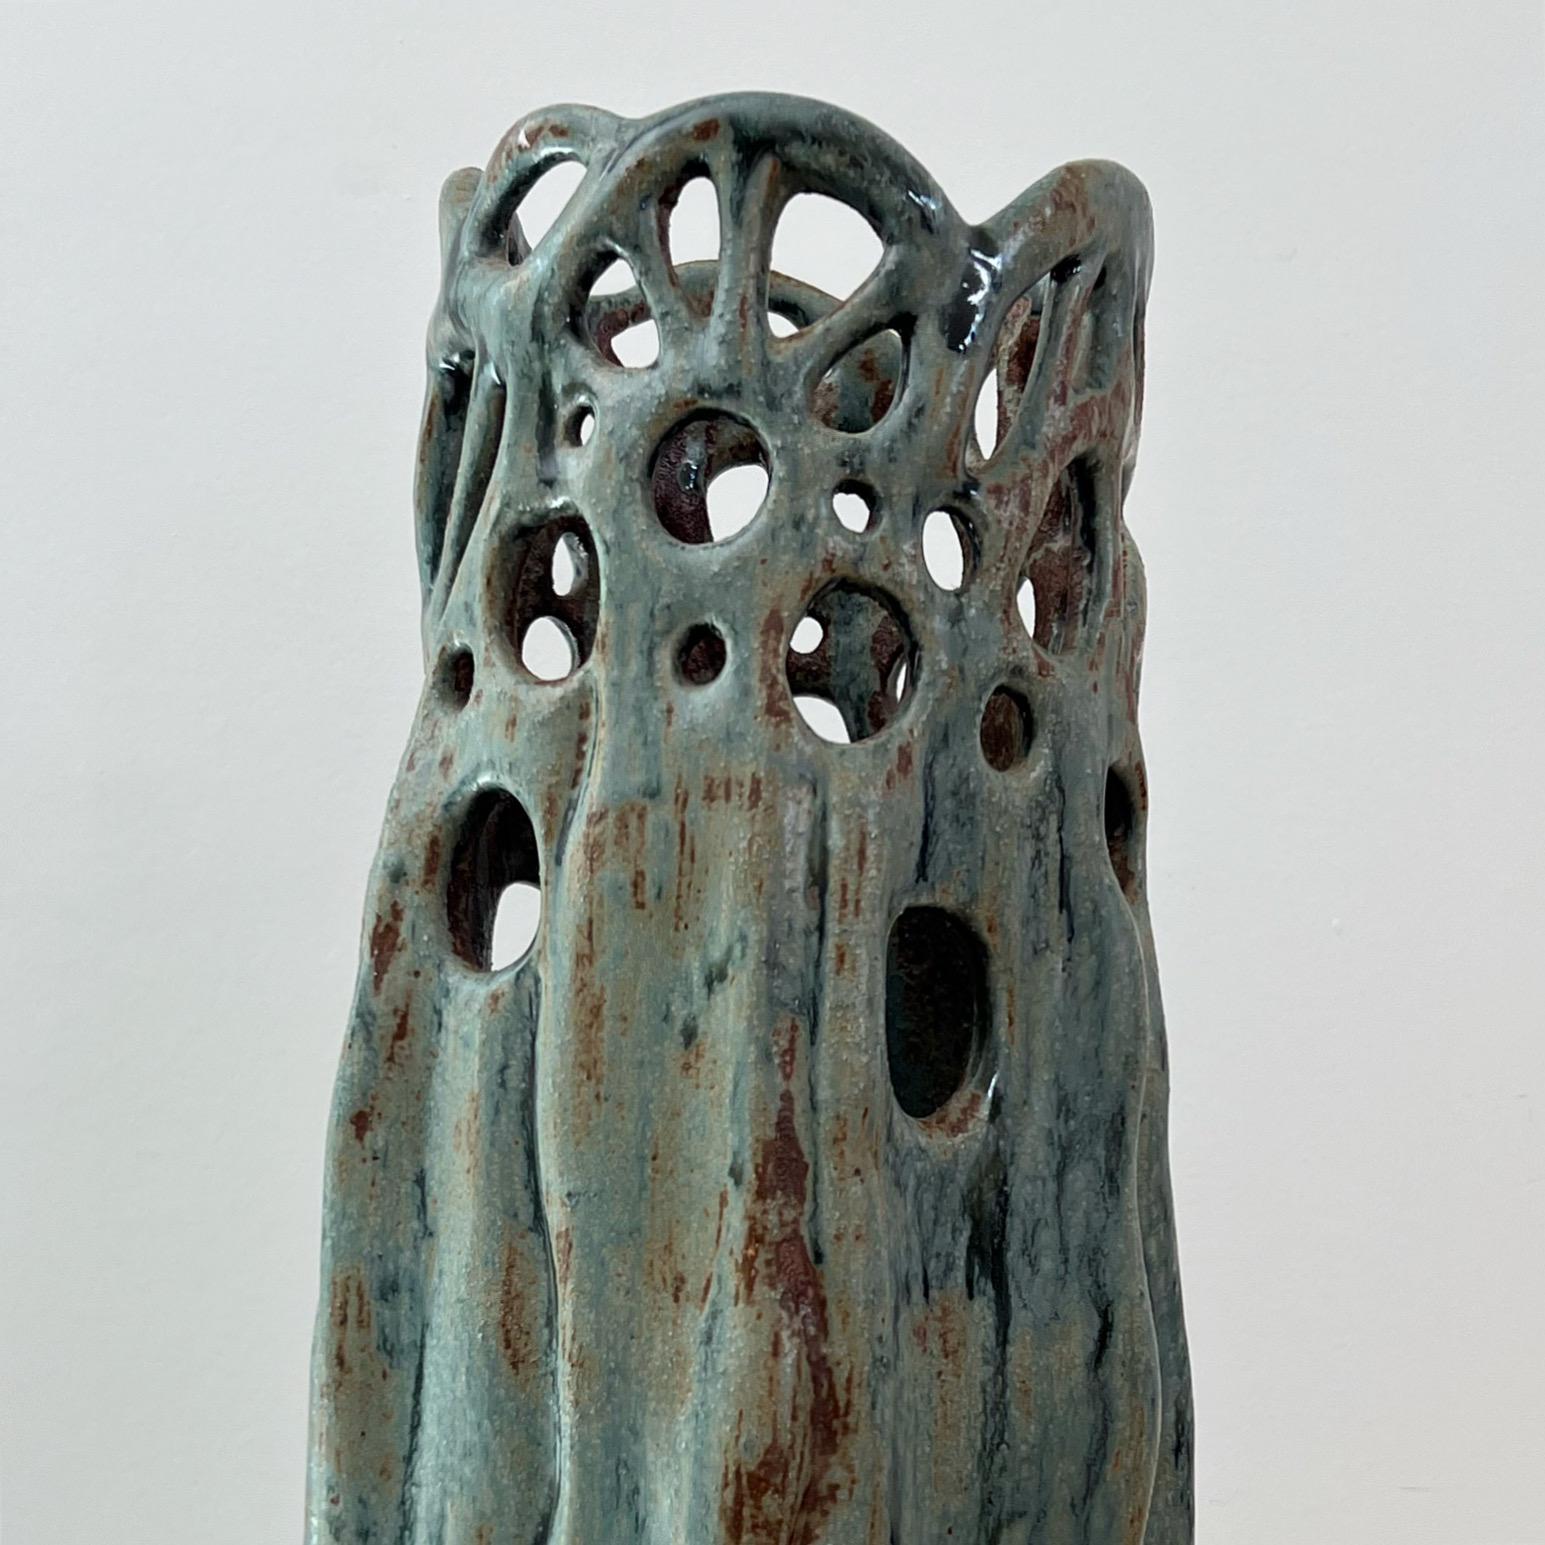 A tall brutalist ceramic vase, 1990s. Style of Sally Bowen Prange. Trypophobes beware: upper half of vase is holes galore. Muted teal and denim with caramel accents. Signed by Wally Wiseman, ‘97. Flawless. Pick up in LA or delivery options